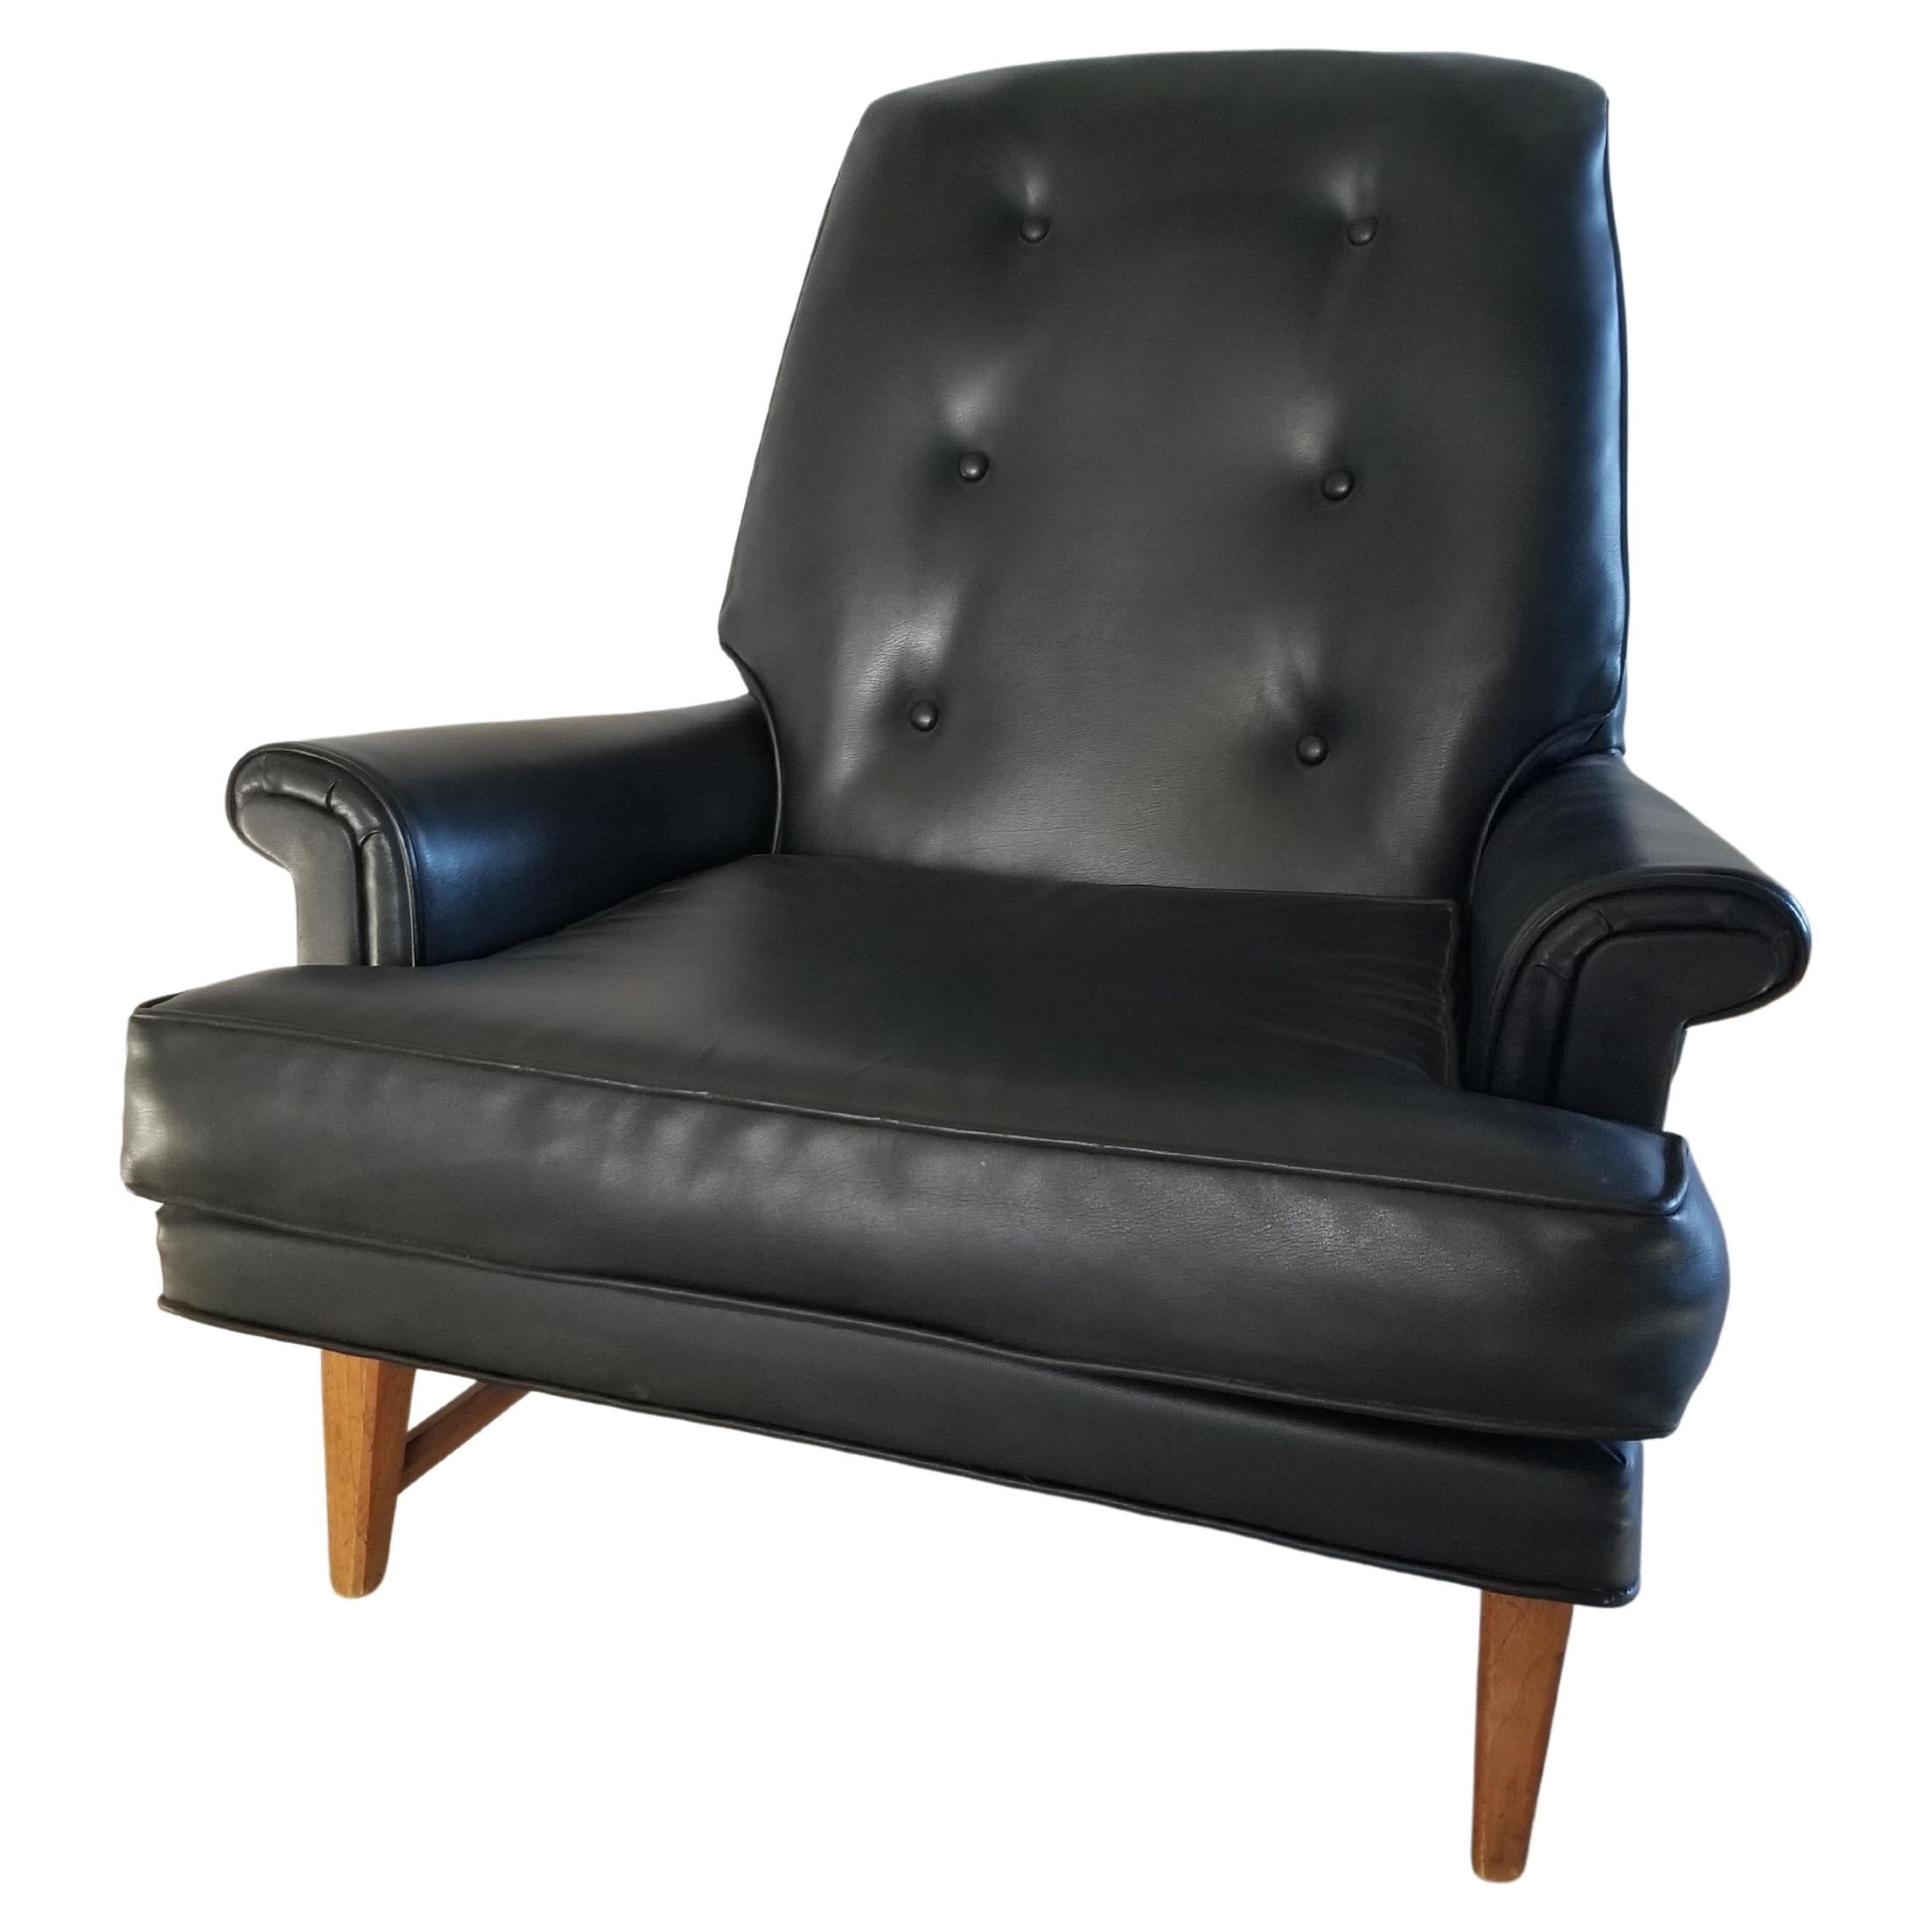 1950s Heritage Faux Leather Mahogany Lounge Chair For Sale